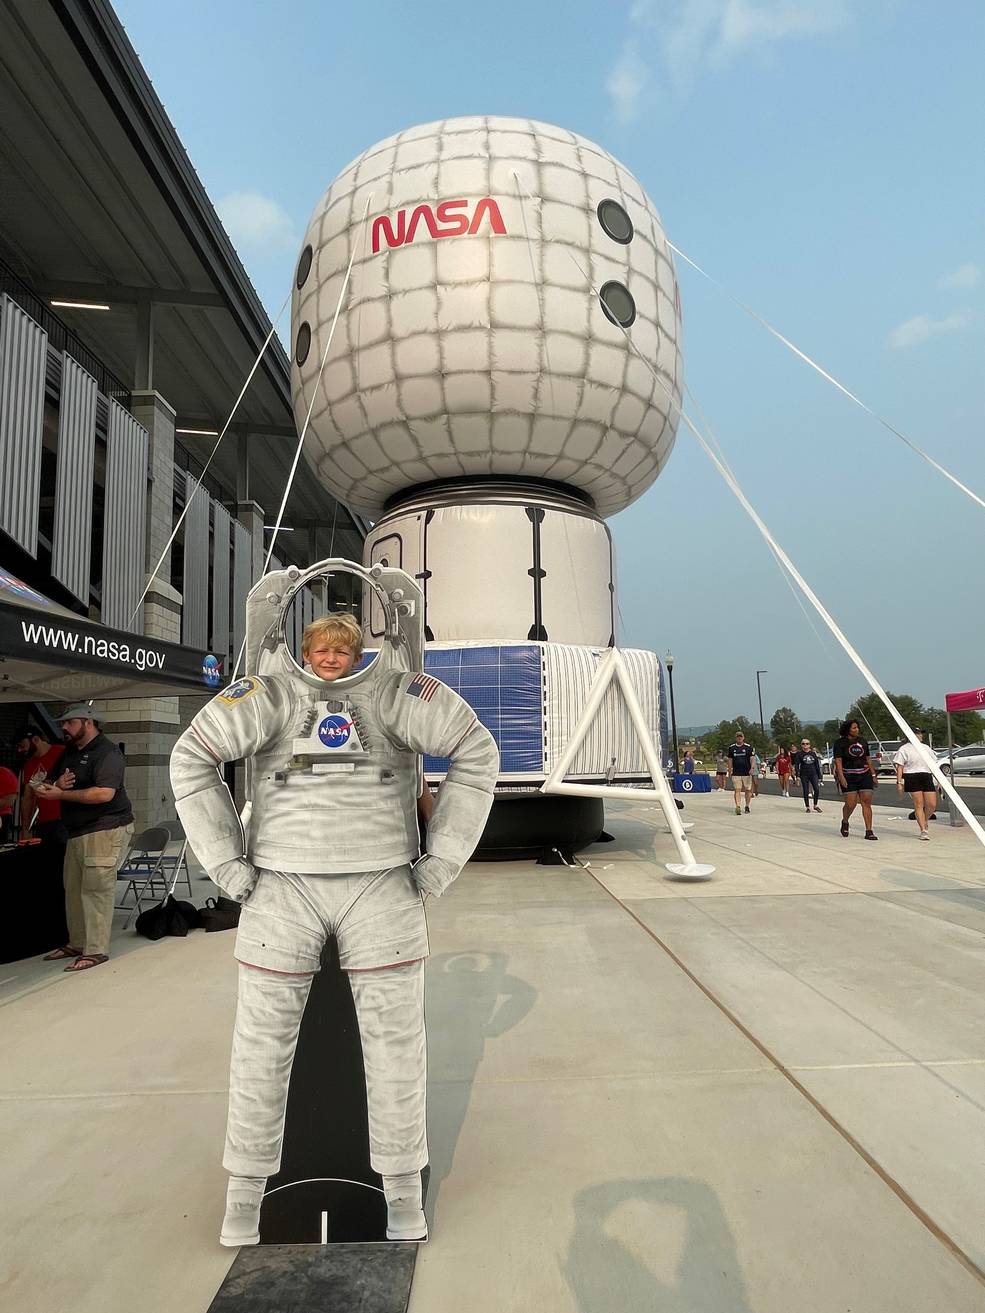 A youth attendee at Space Night, hosted by the Huntsville City Football Club, poses in an astronaut suit in front of an inflatable full-scale replica of a lunar surface habitat.